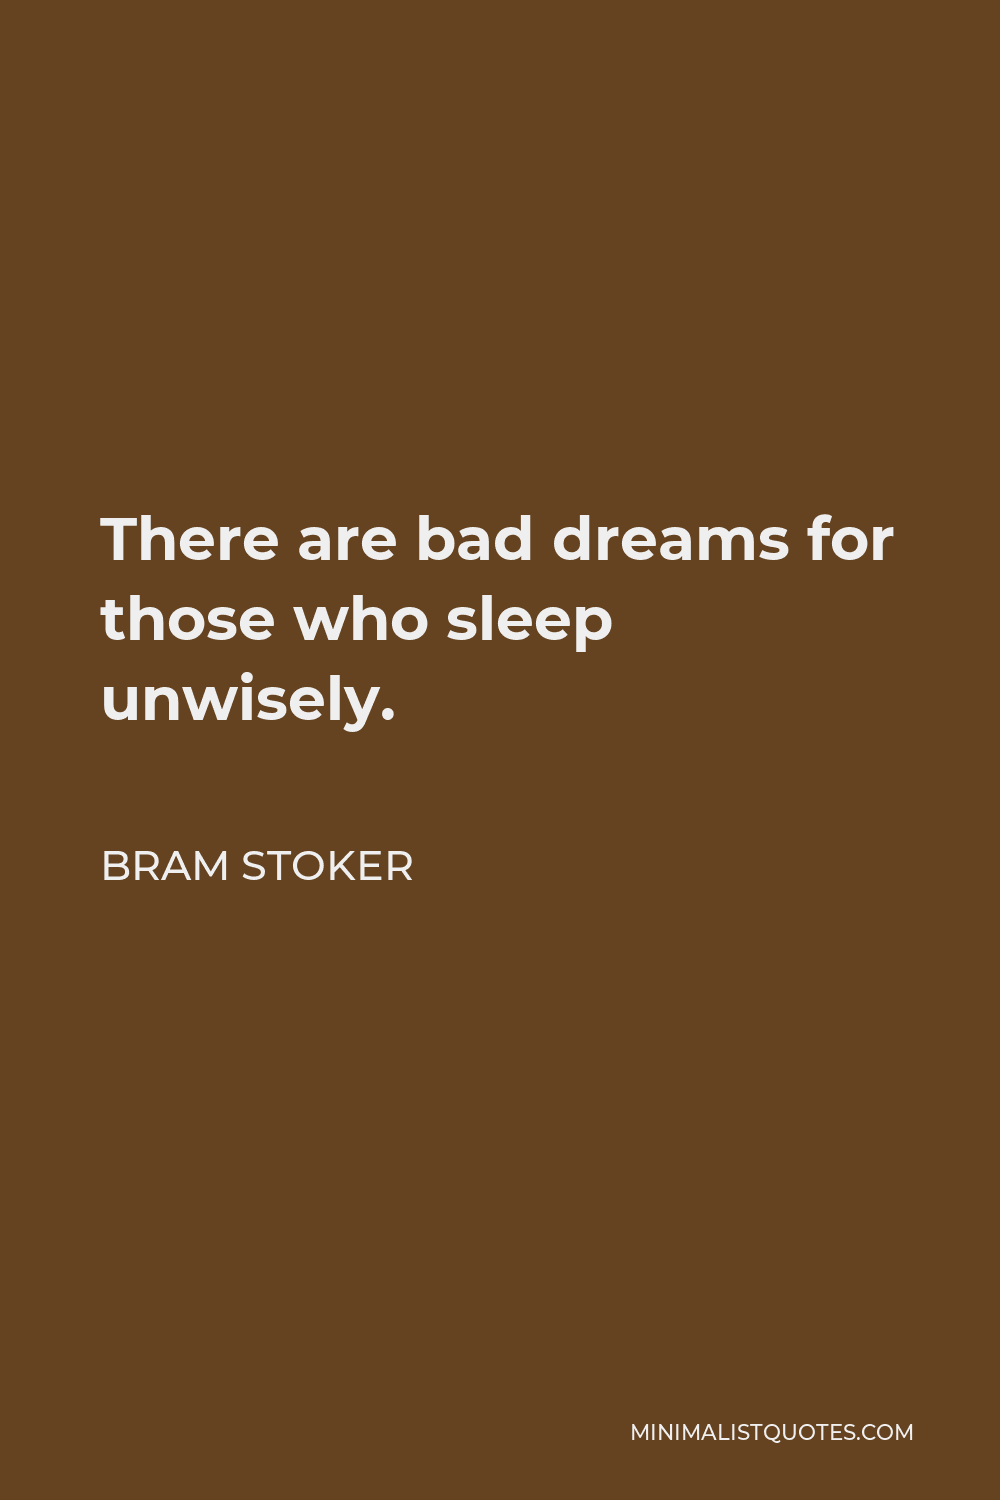 Bram Stoker Quote - There are bad dreams for those who sleep unwisely.